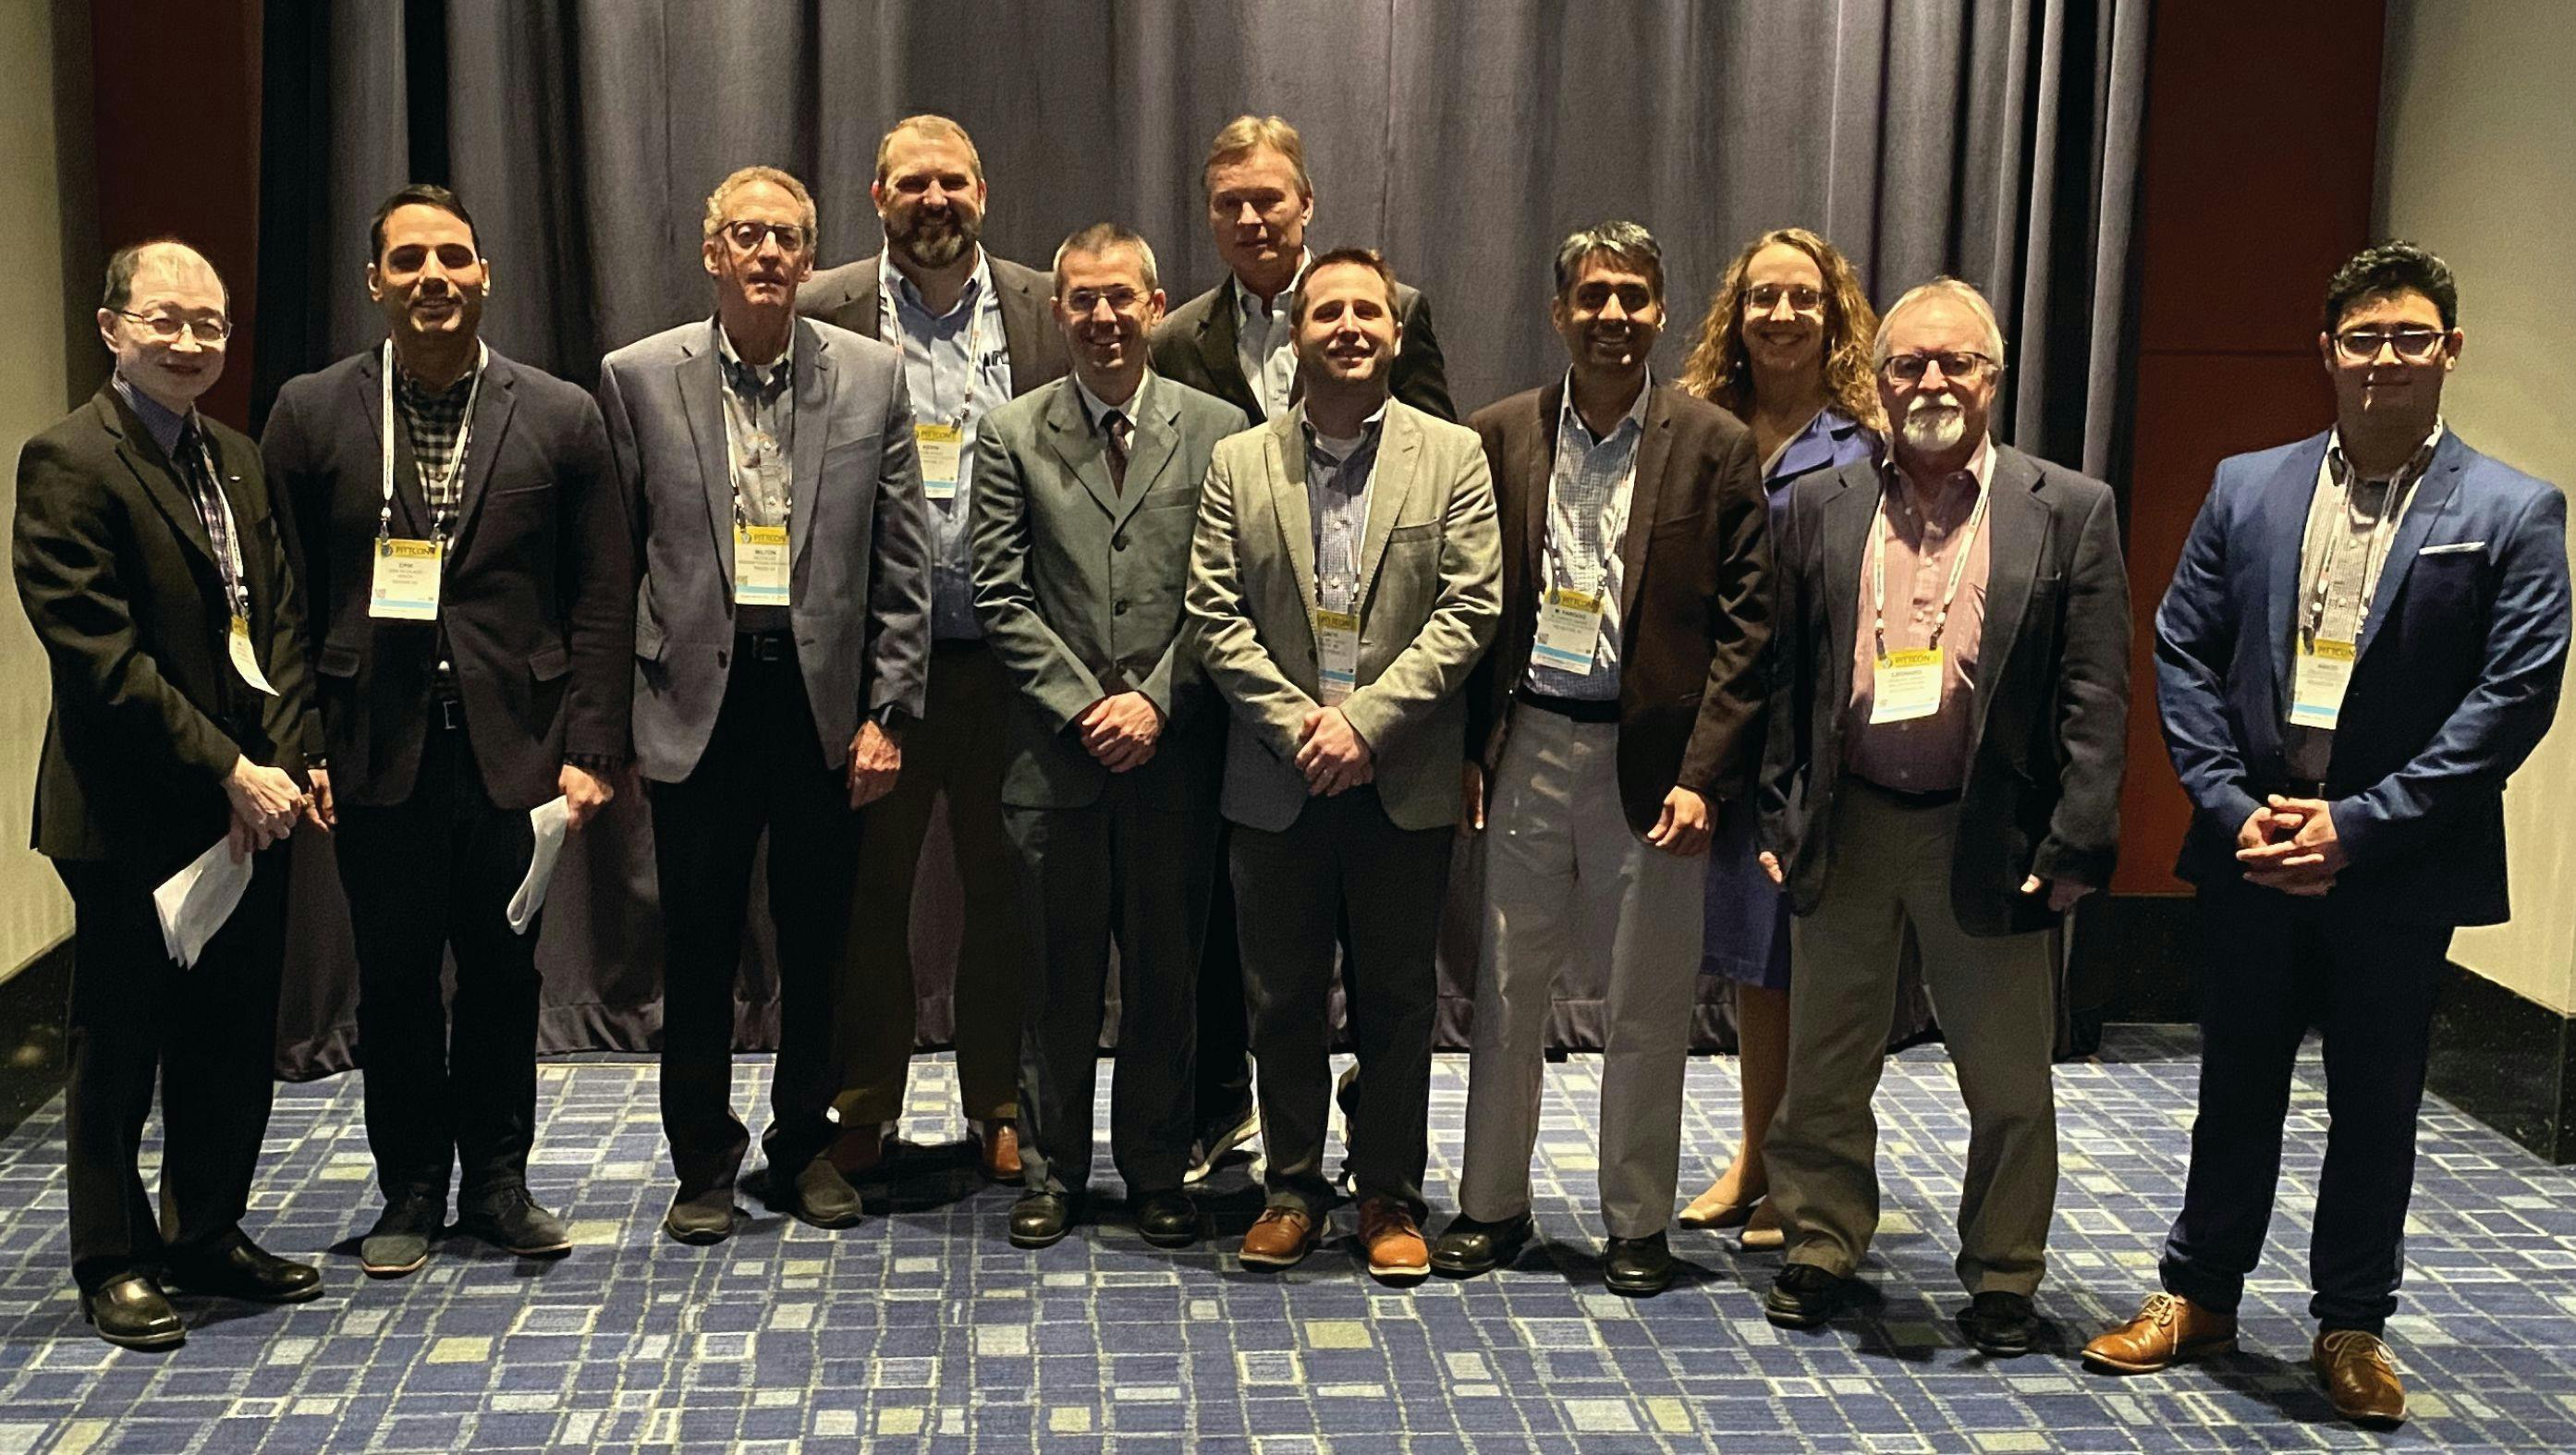 From the 2020 LCGC Lifetime Achievement Award session at PittCon. Regalado is the second from the left along with an incredible array of fellow distinguished scientists. From left to right: Jim Luong, Regalado, Milton Lee, Kevin Schug, Fabrice Gritti, Daniel W. Armstrong, Zach Breitbach, Farooq Wahab, Laura Bush, Len Sidisky and Abiur Portillo. Image submitted by Daniel Armstrong.